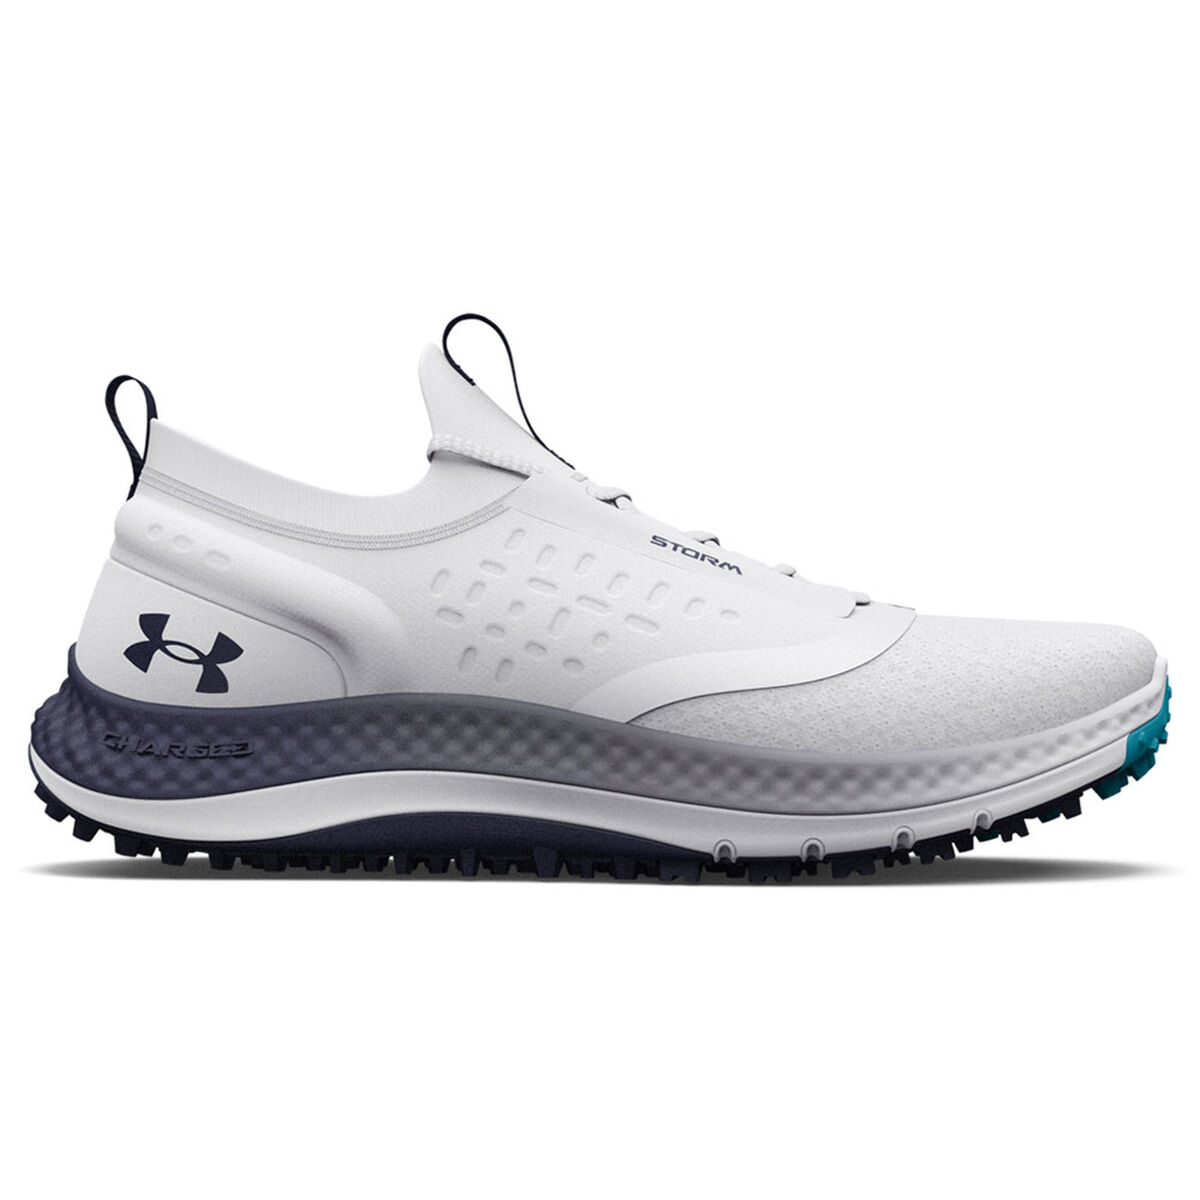 Under Armour Men’s White and Navy Blue Charged Phantom Spikeless Golf Shoes, Size: 7 | American Golf